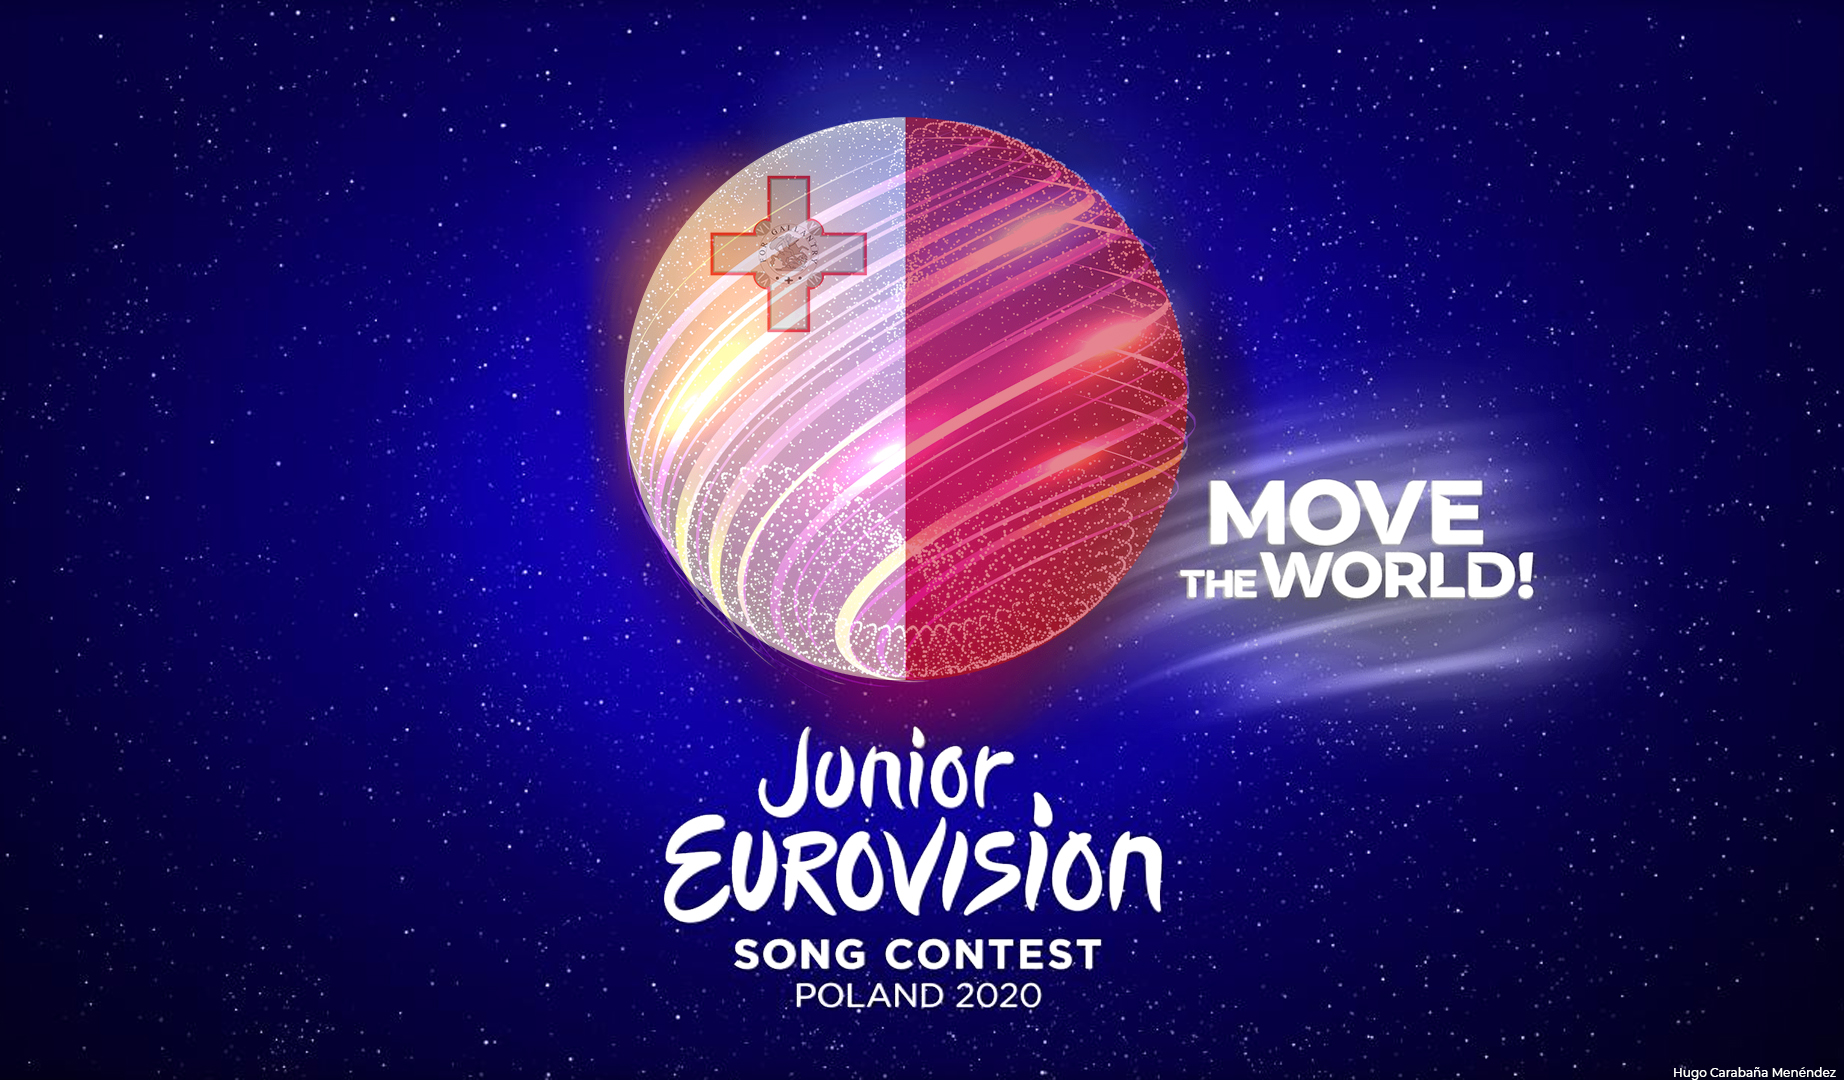 Junior Eurovision: Malta confirms participation – Song submissions open